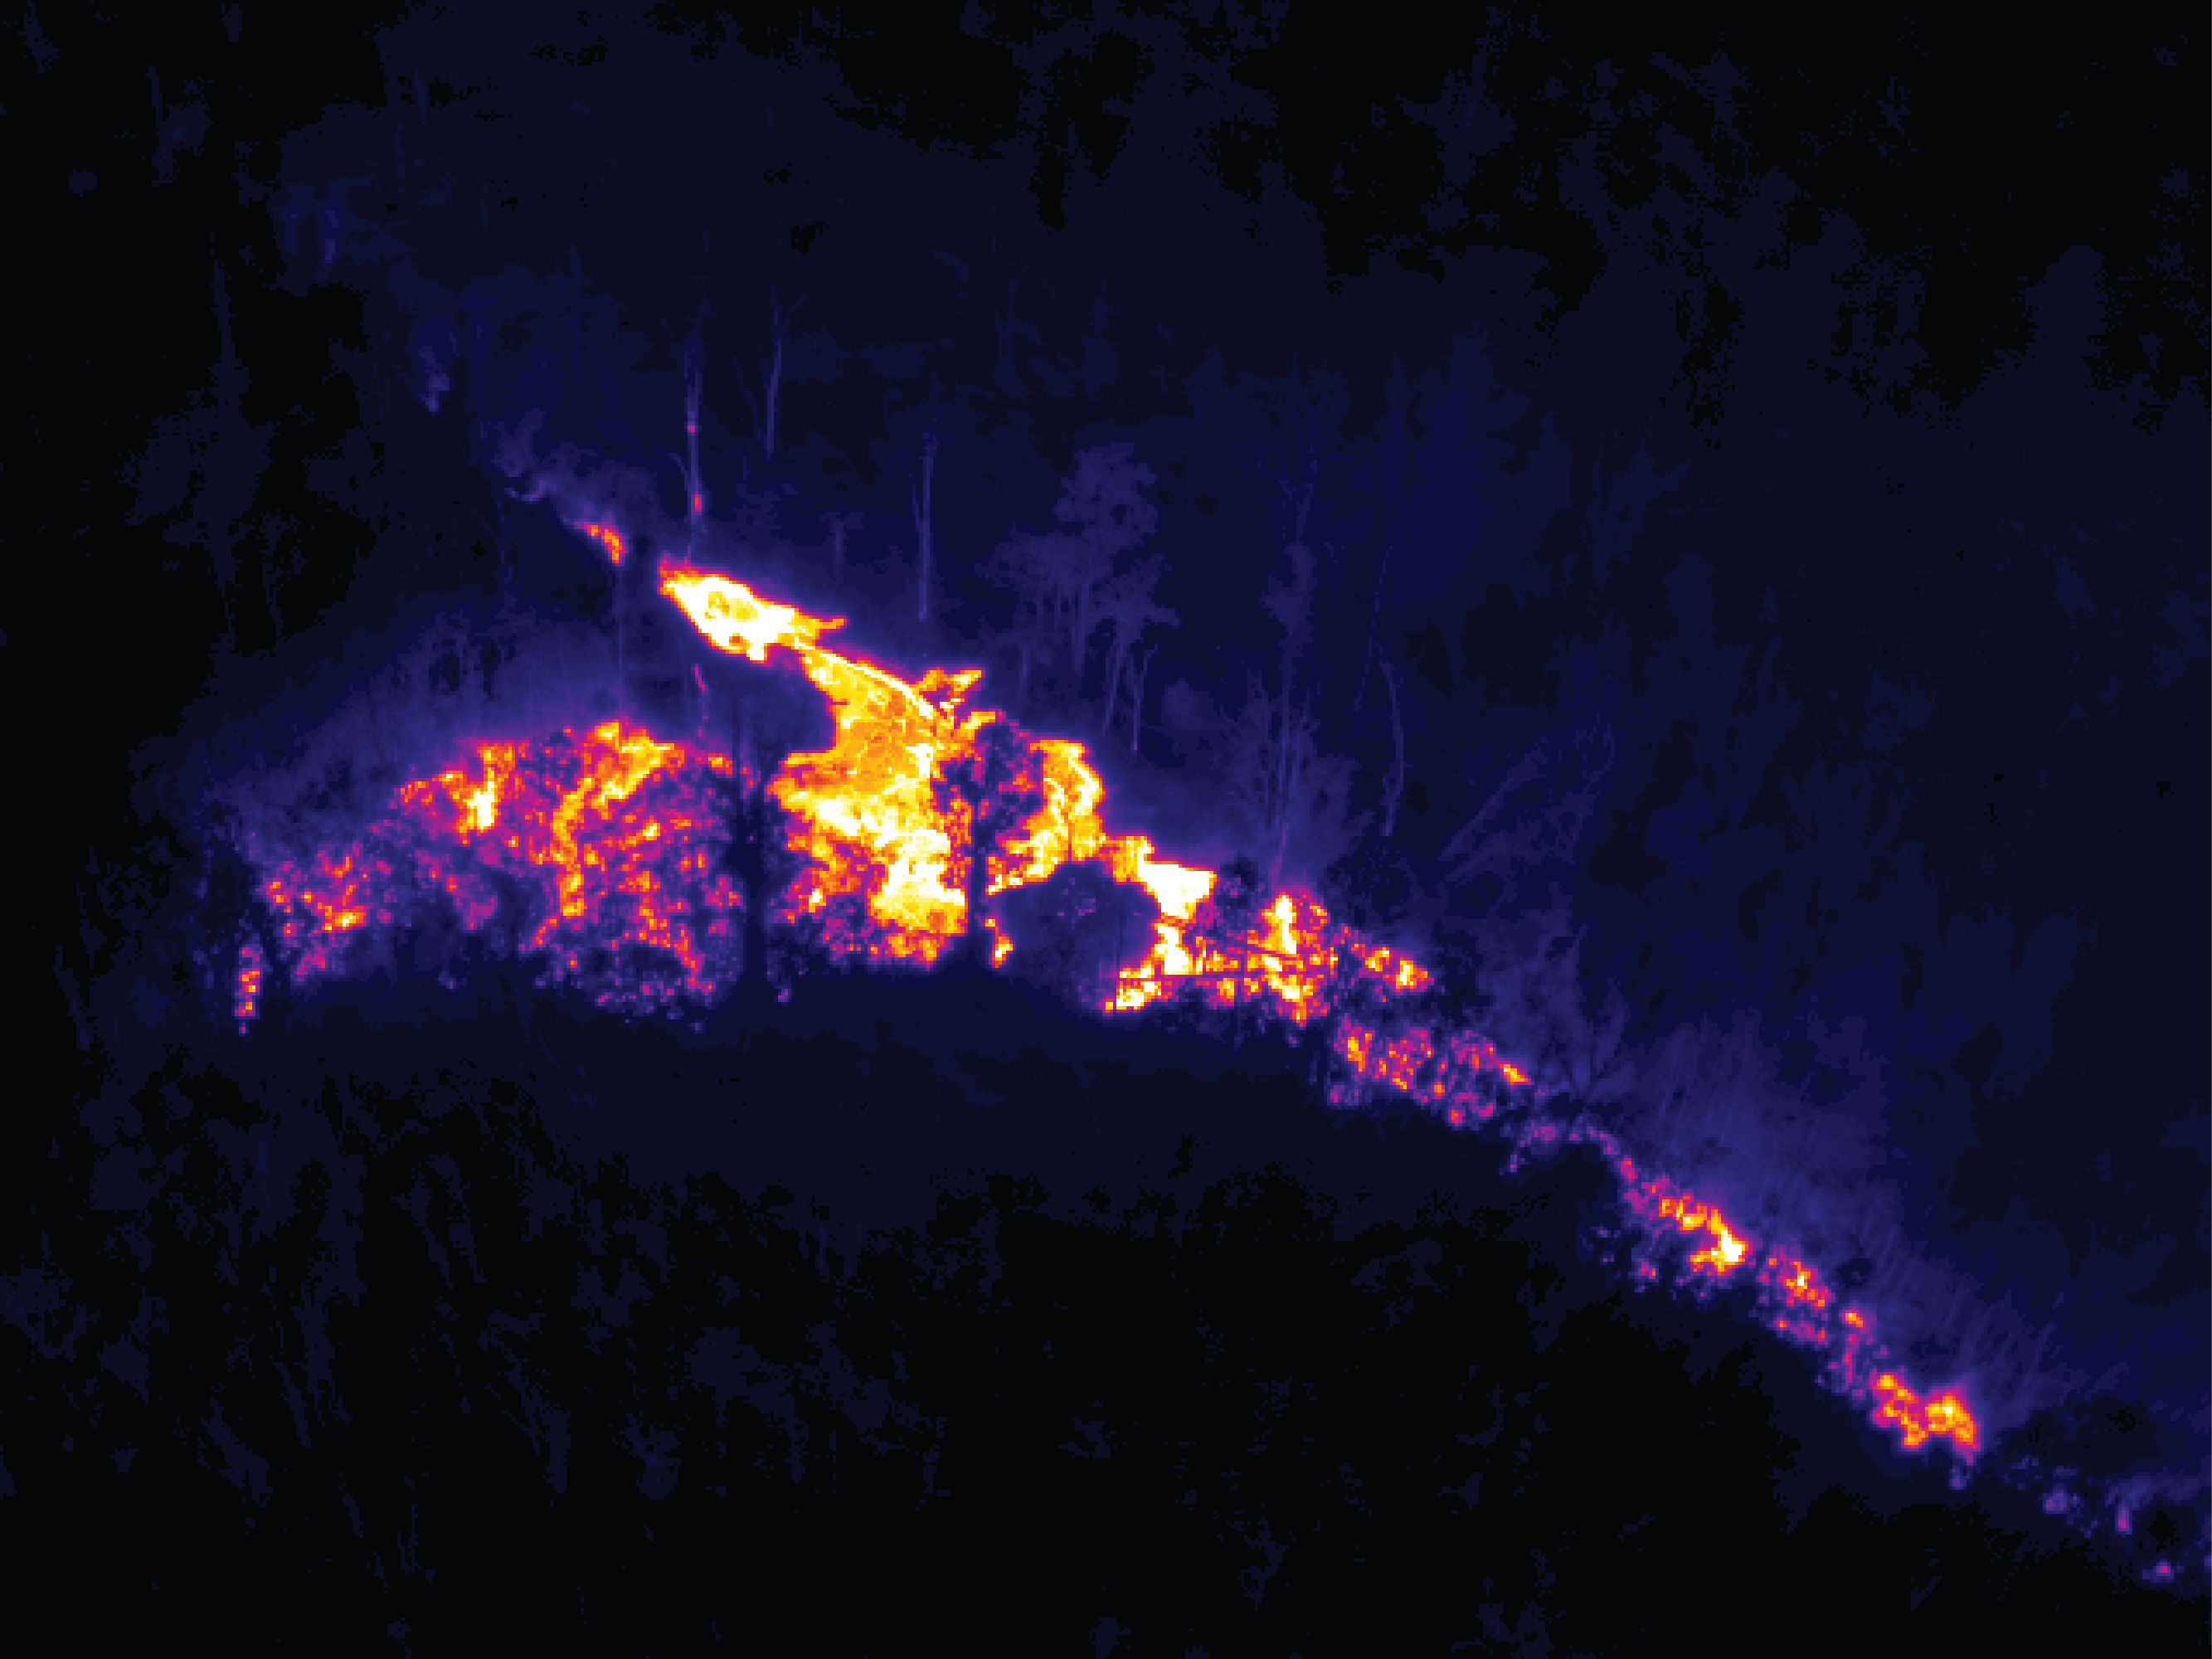 At the far end of the lava-filled crack, lava spilled out towards the north a very short distance. In this view from a thermal camera, the small lobe of lava moving north is easily visible. The trees surrounding the crack show brighter colors as they are heated by the lava flow, but not to the point of combustion. (USGS HVO)